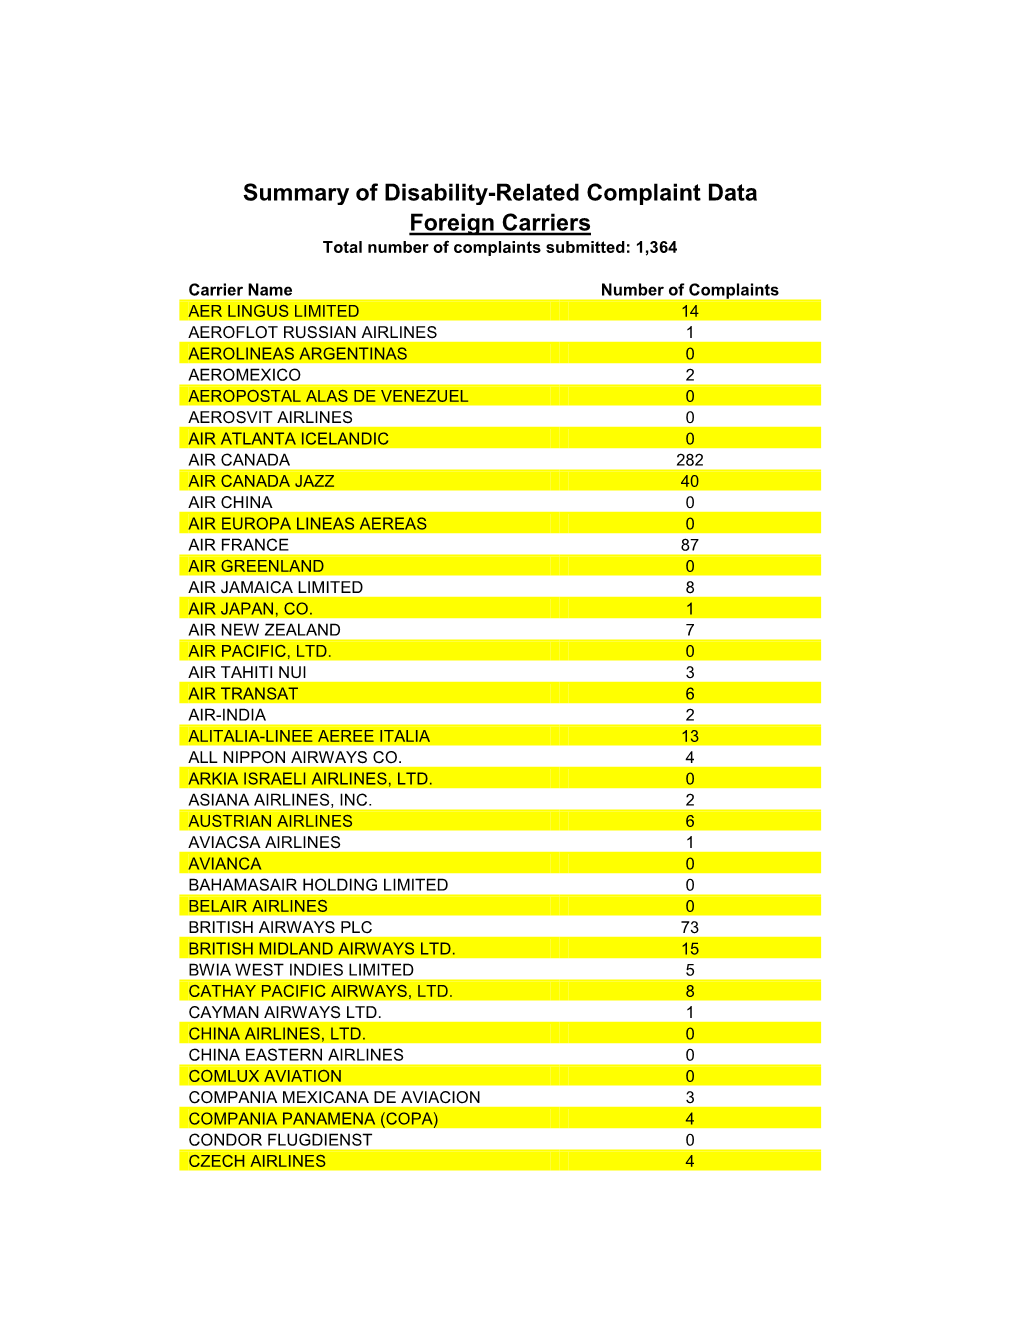 Summary of Disability-Related Complaint Data Foreign Carriers Total Number of Complaints Submitted: 1,364